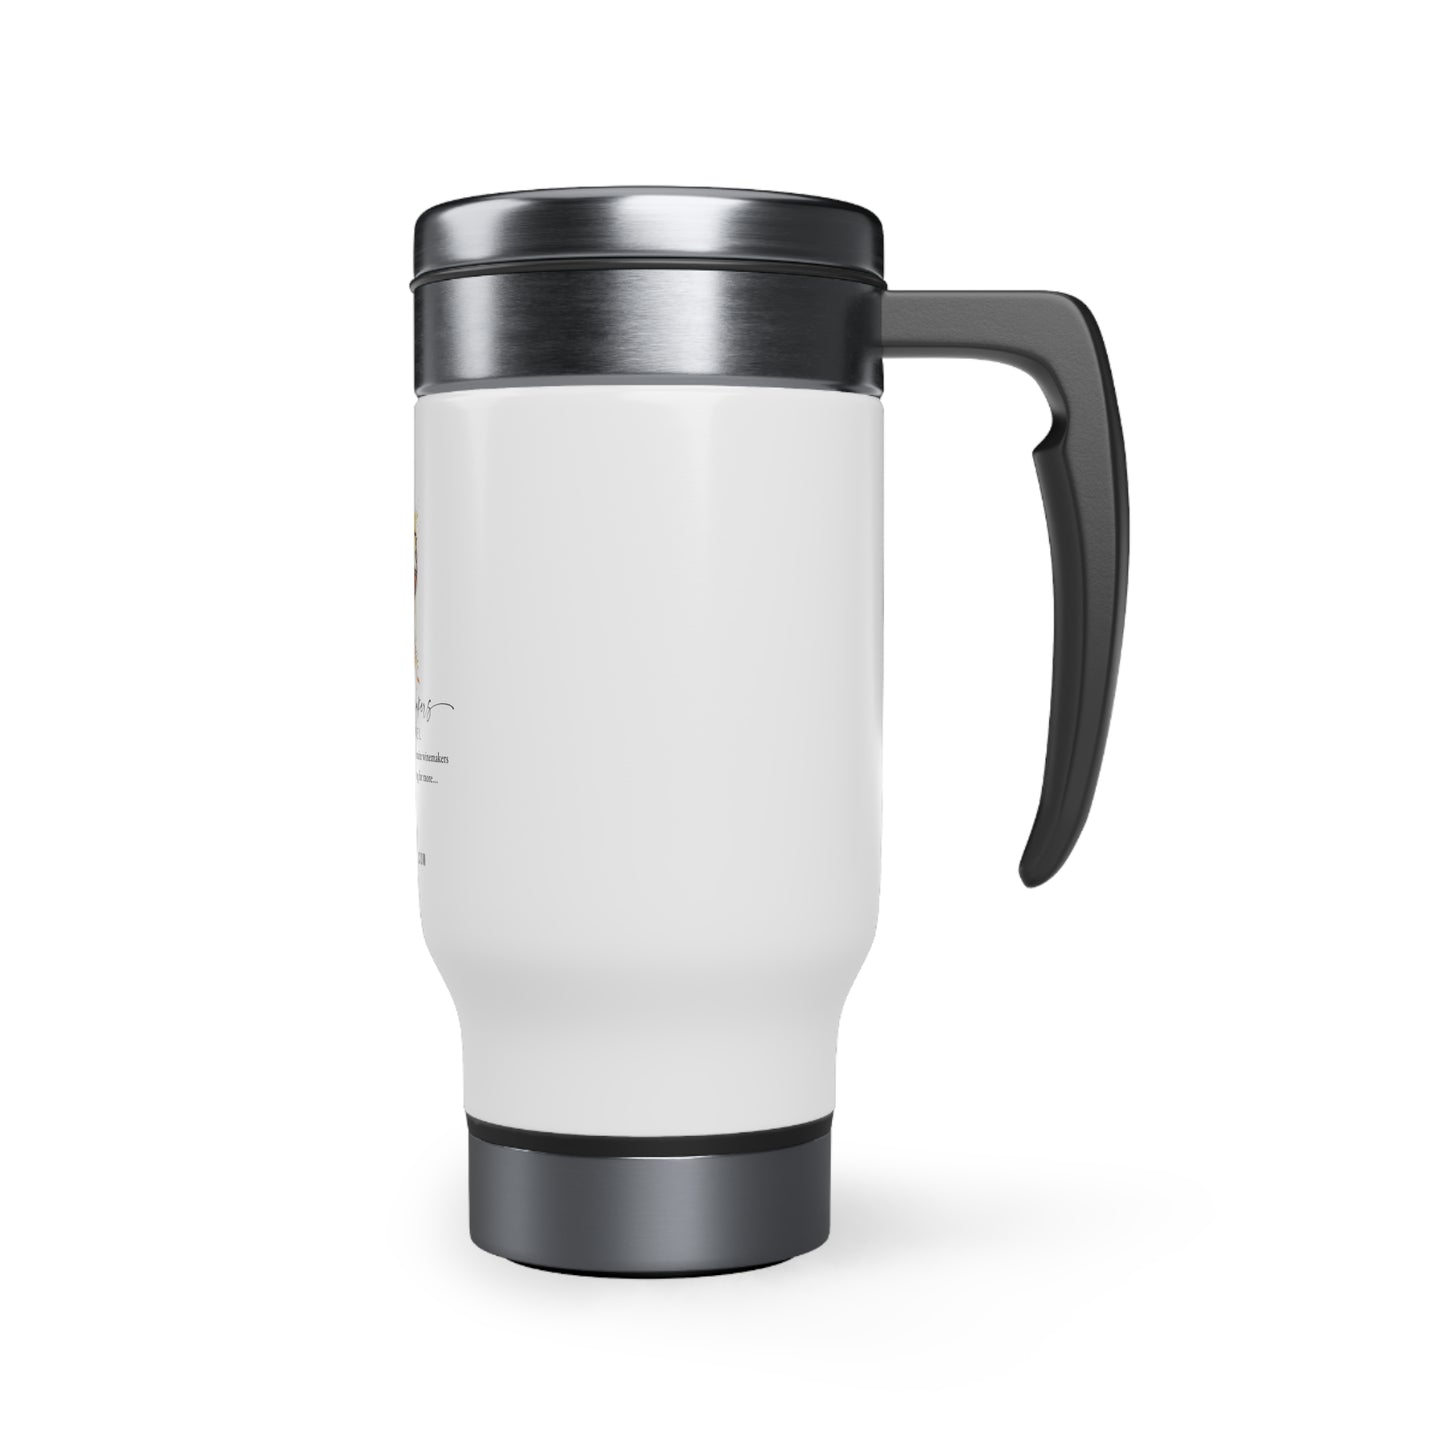 Wicked Winemakers Stainless Steel Travel Mug with Handle, 14oz